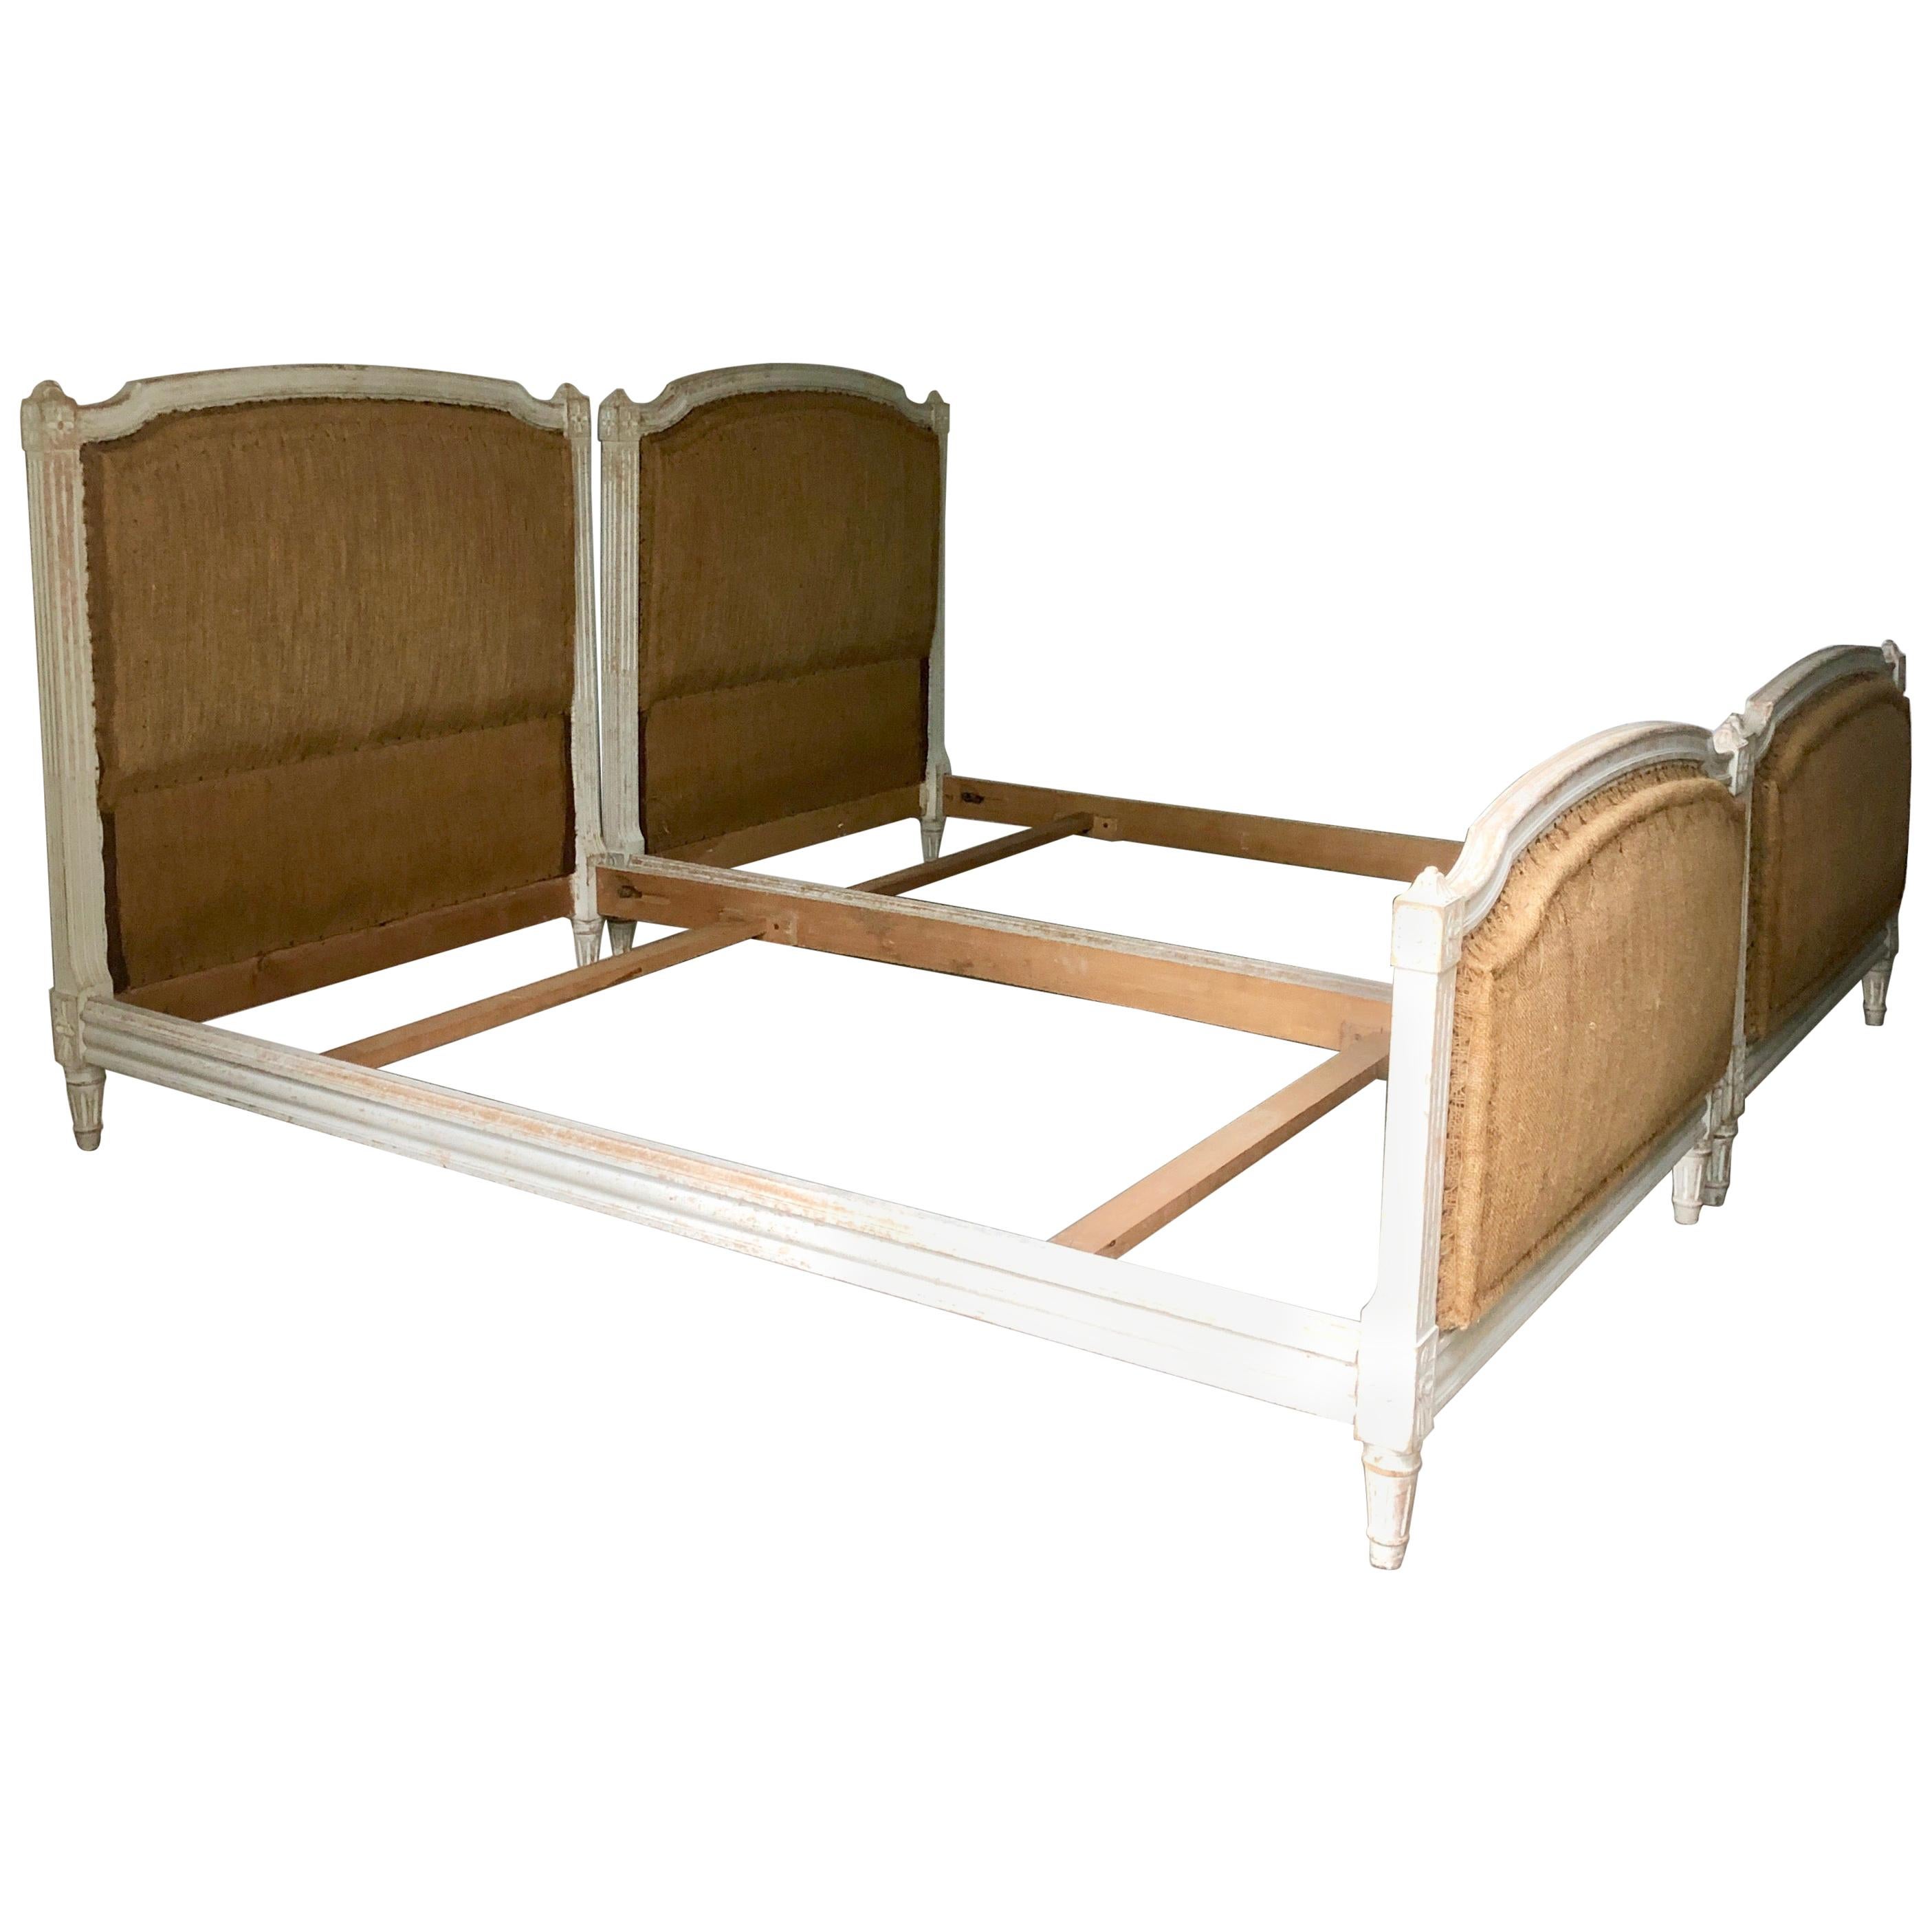 Pair of 19th Century French Single Beds